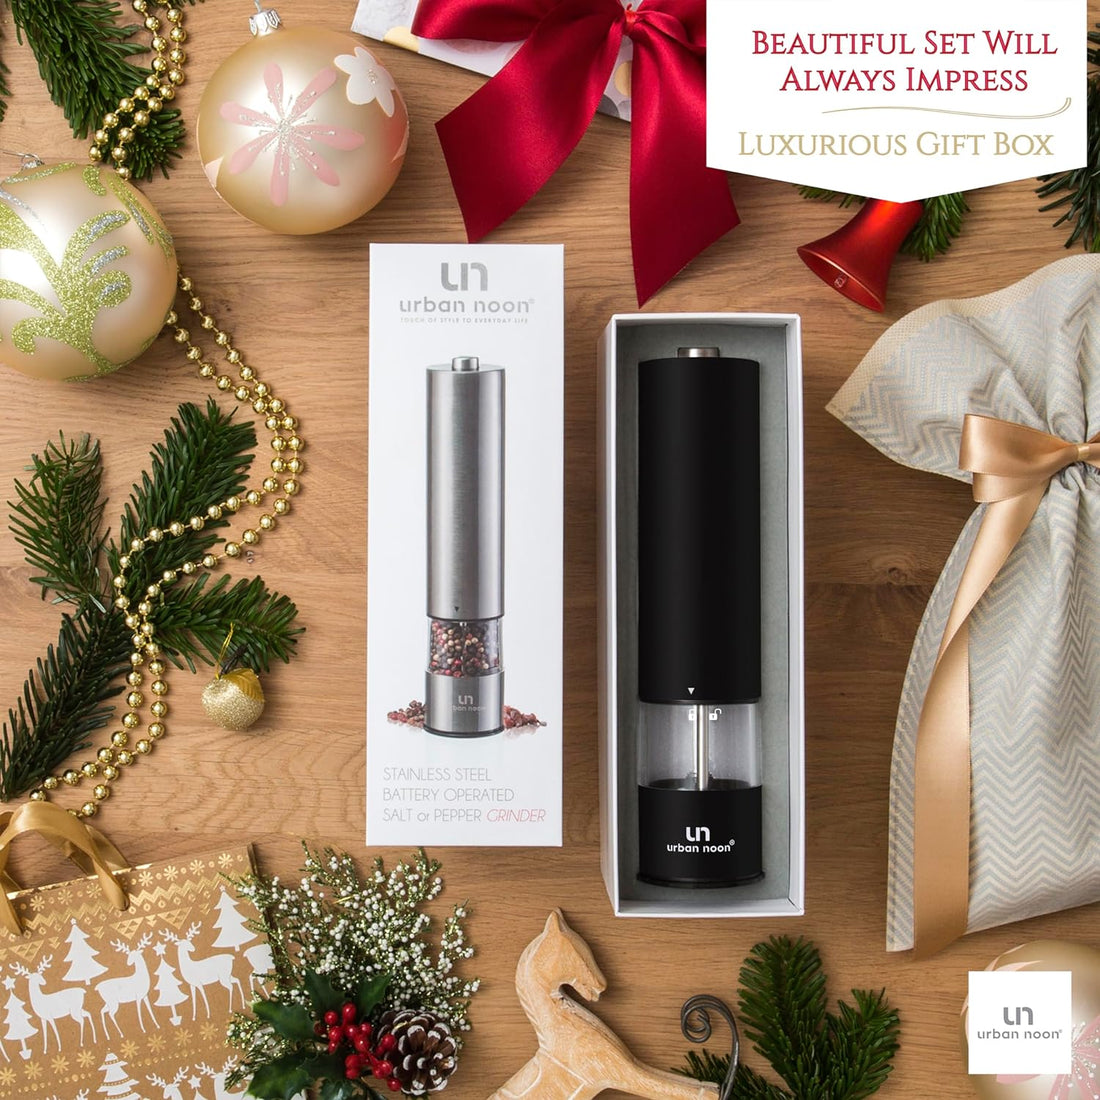 Electric Pepper Grinder or Electric Salt Grinder - Single Battery Operated Stainless Steel Salt or Pepper Mill with Light (Black) - Automatic One Handed Operation with Adjustable Ceramic Grinder